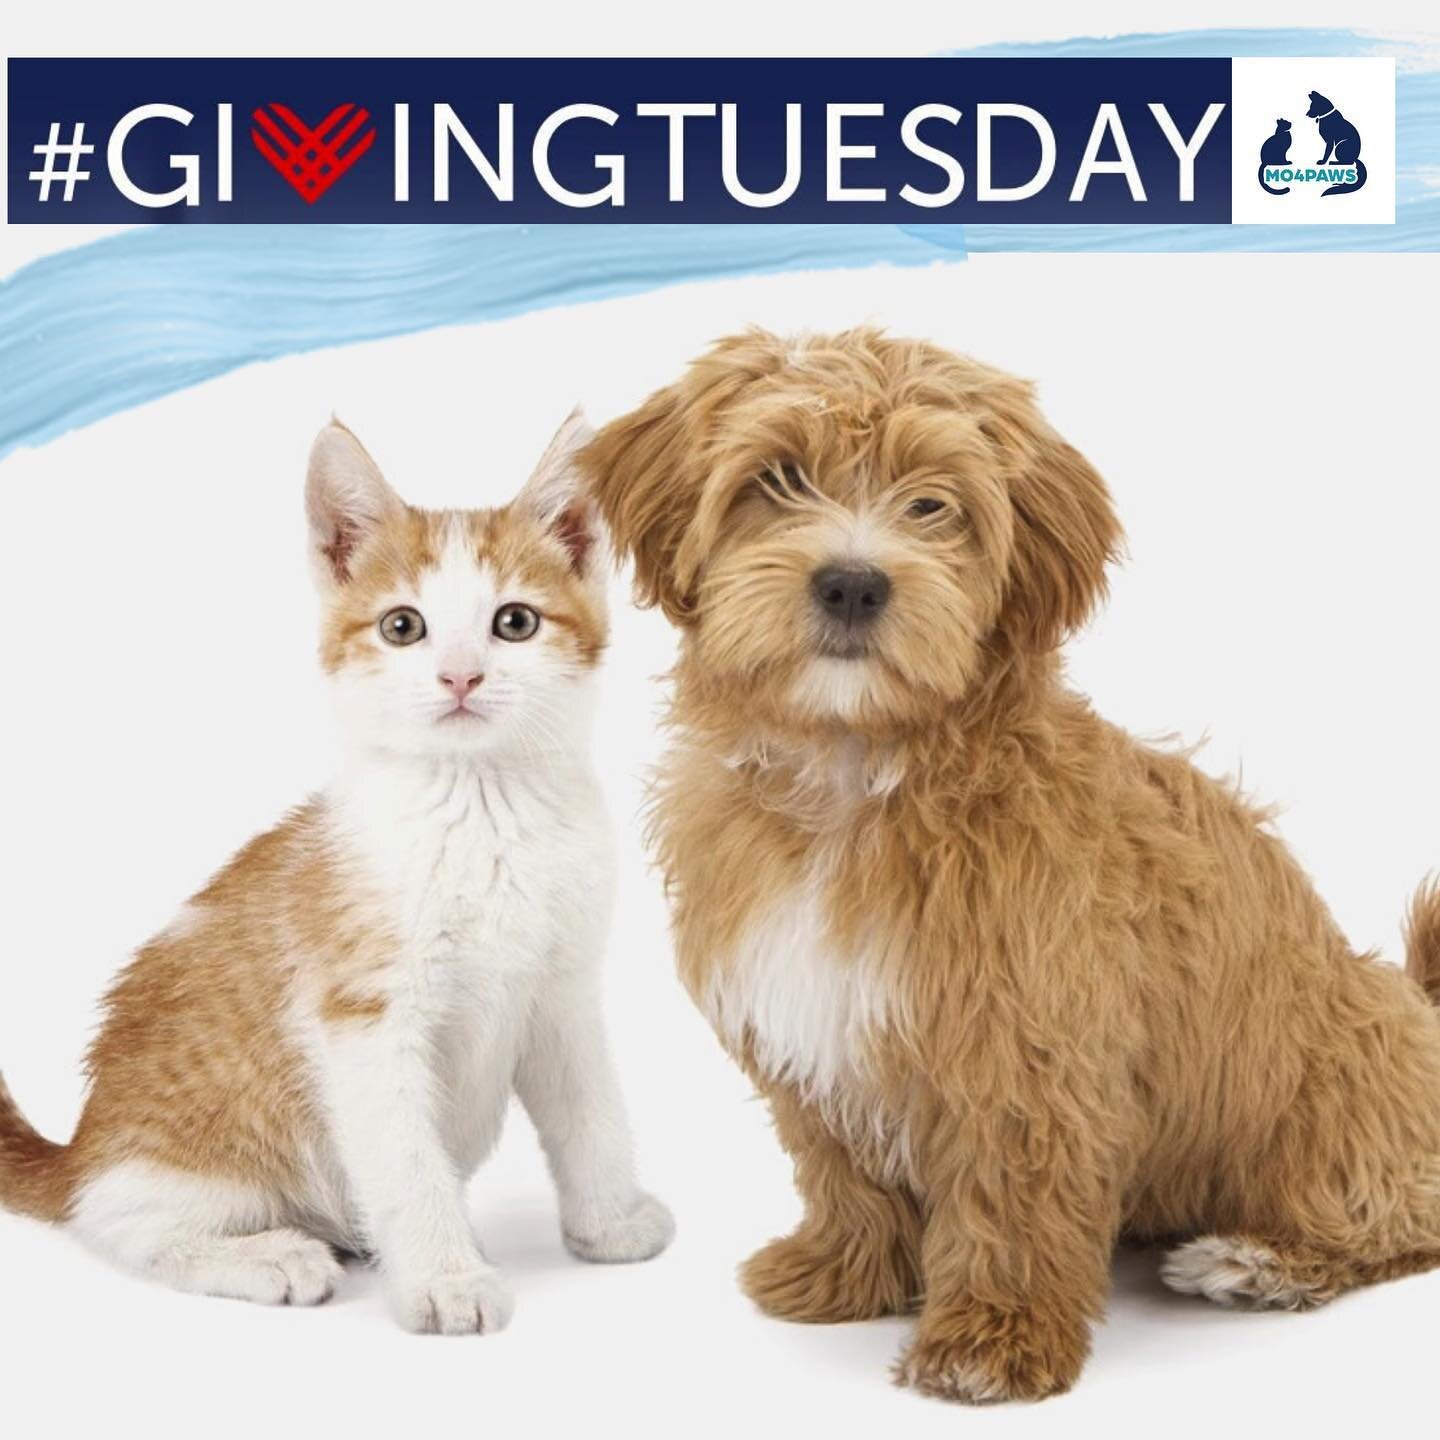 Today is #givingtuesday and that&rsquo;s a BIG deal &mdash; especially for the world&rsquo;s little creatures.&nbsp;🐾
.
.
Giving Tuesday is when compassionate people around the world come together to lift up organizations who share their vision of a